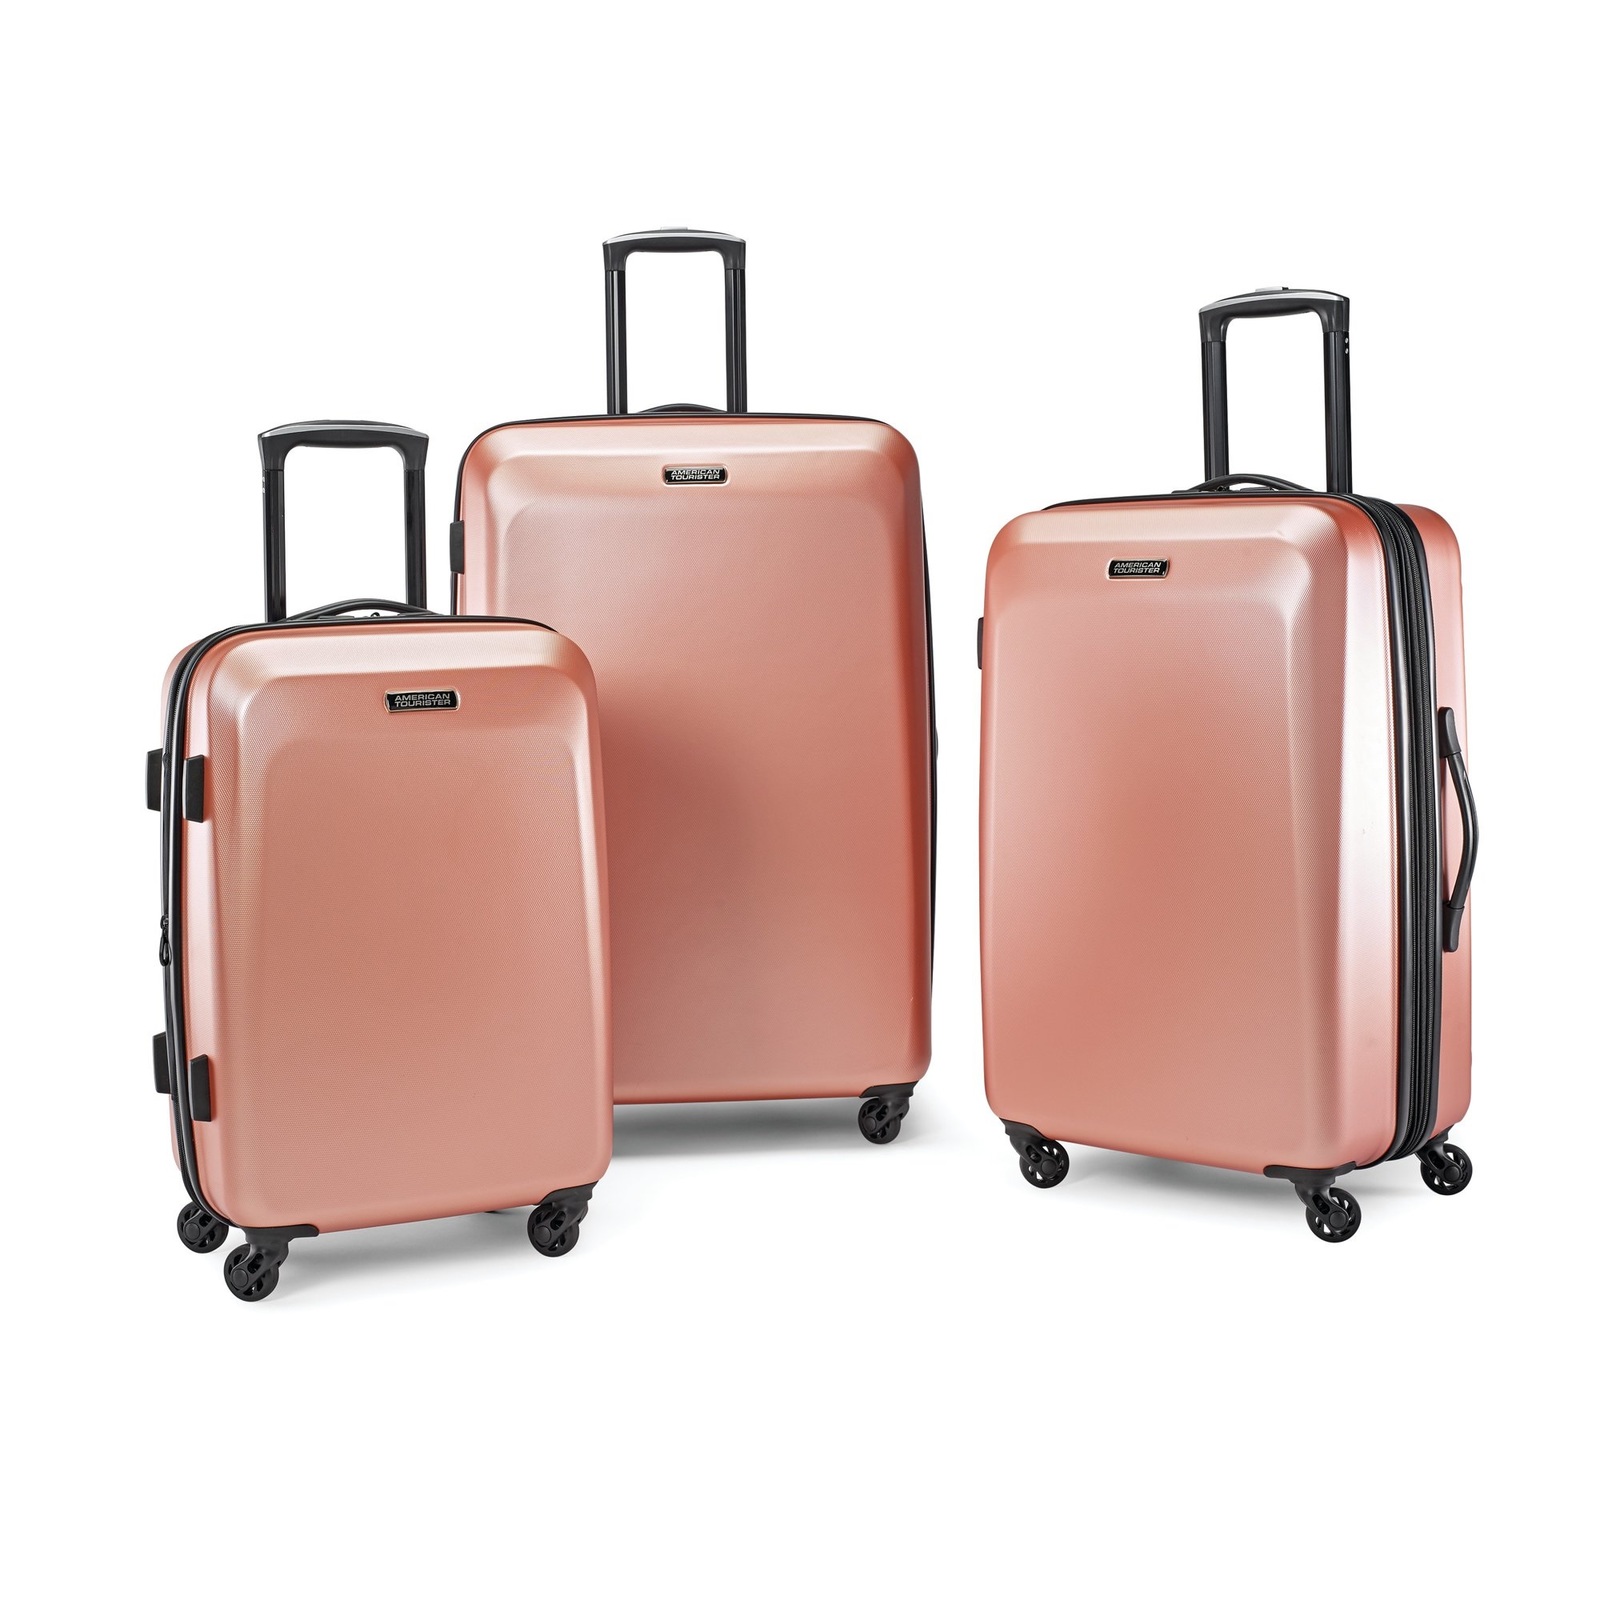 American Tourister Moonlight 3 Piece Hardside Spinner Luggage Set - $196.59